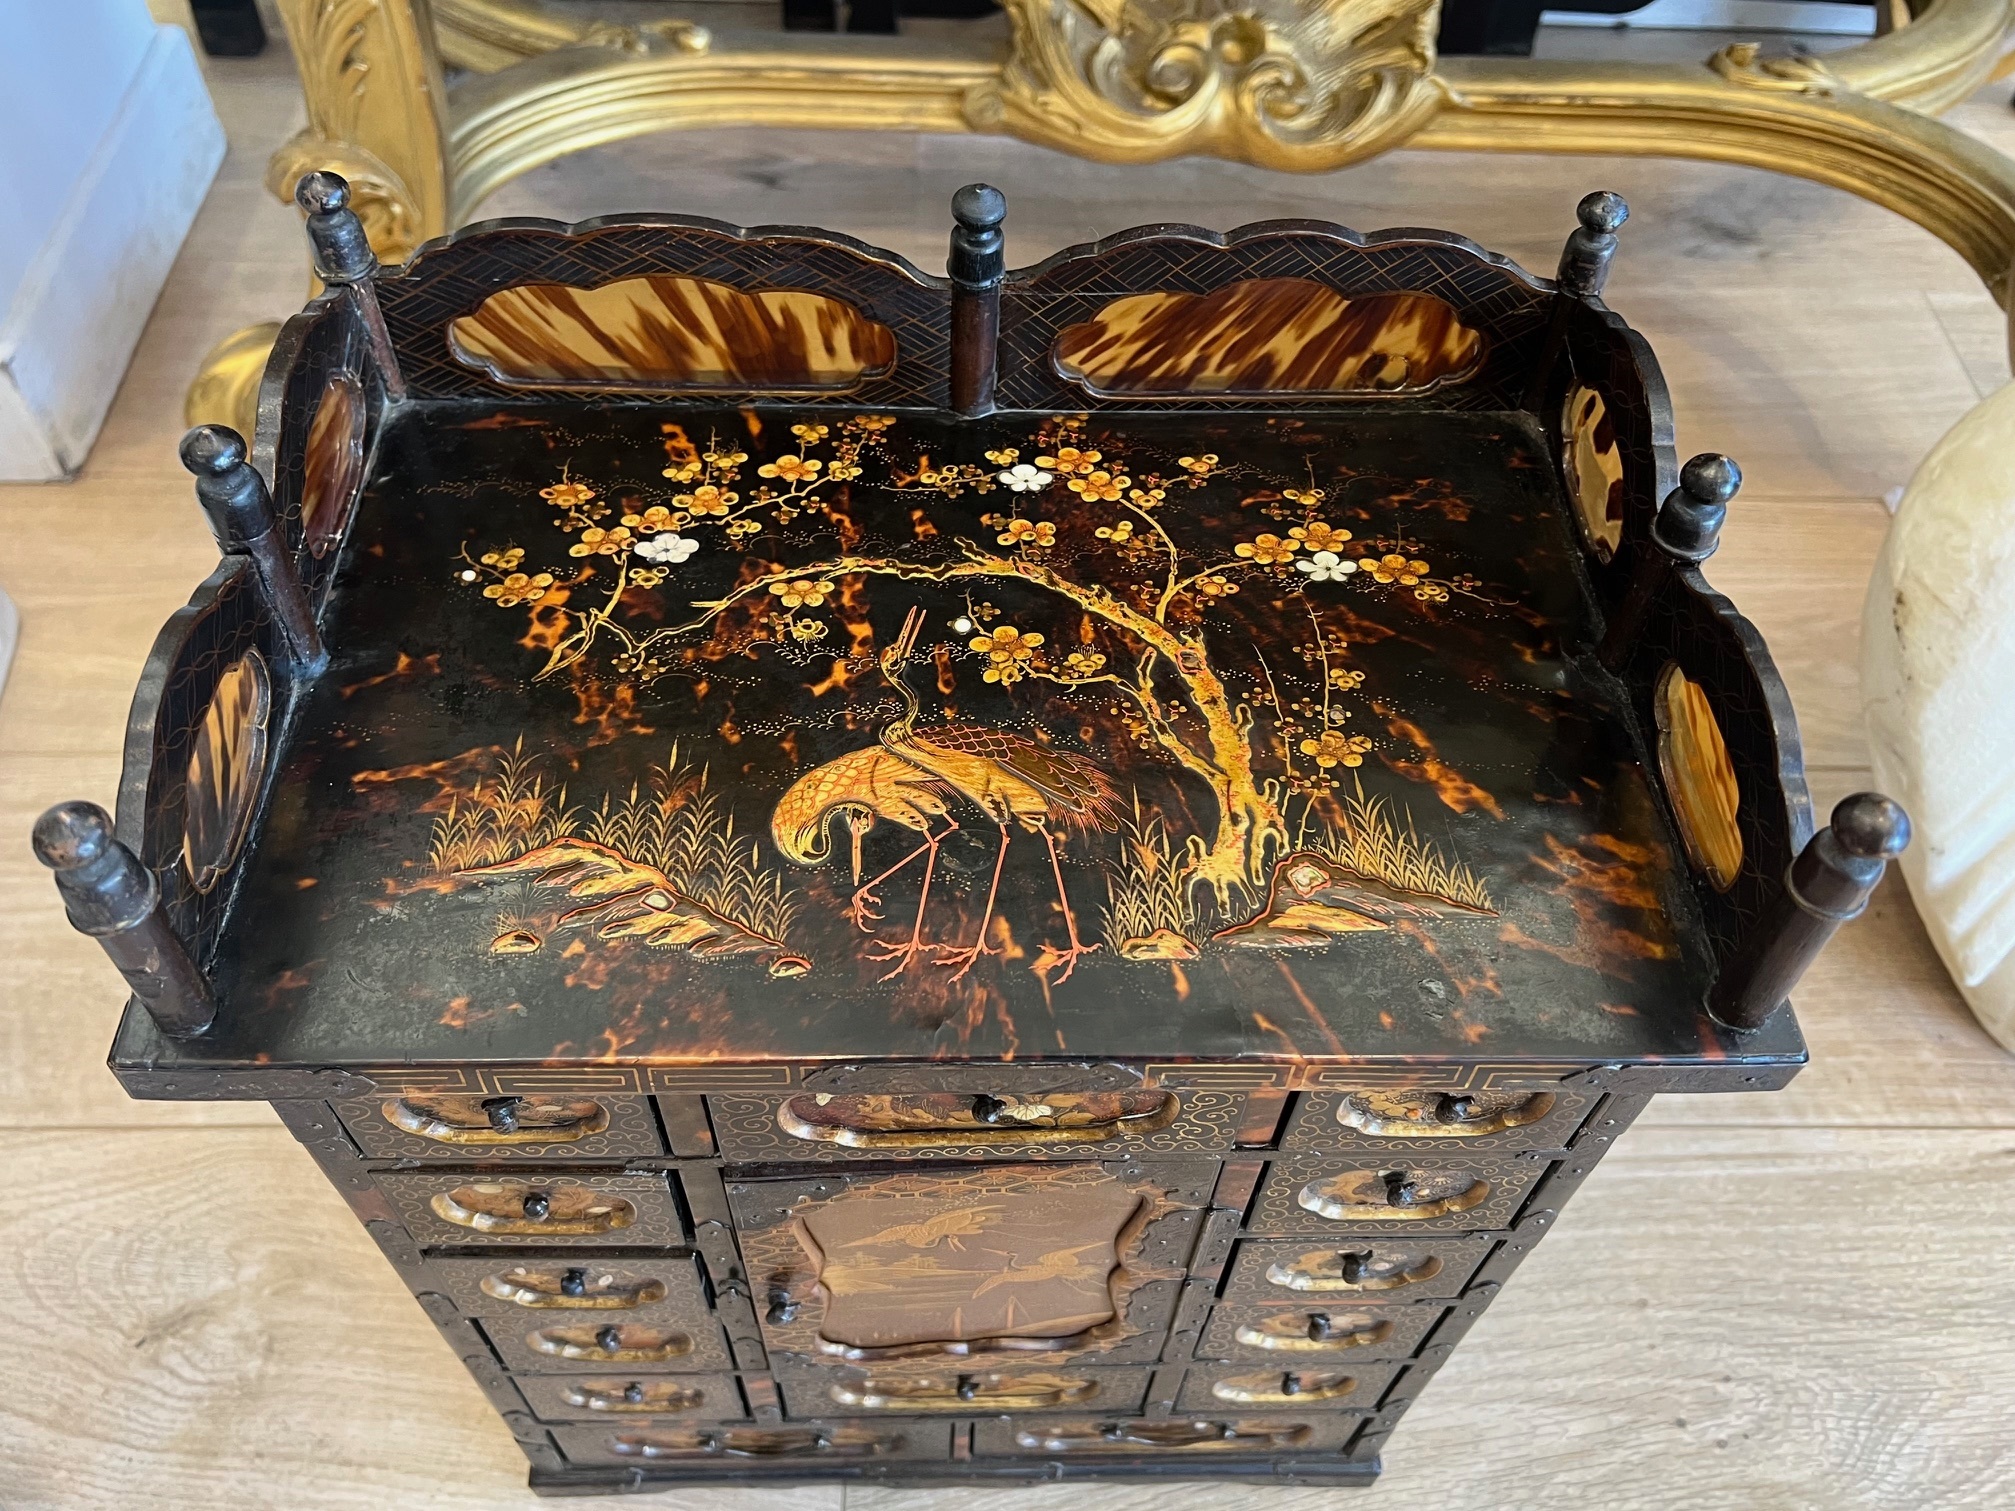 A FINE LATE 19TH CENTURY JAPANESE TORTOISESHELL, LACQUER AND GOLD TABLE CABINET - Image 10 of 12